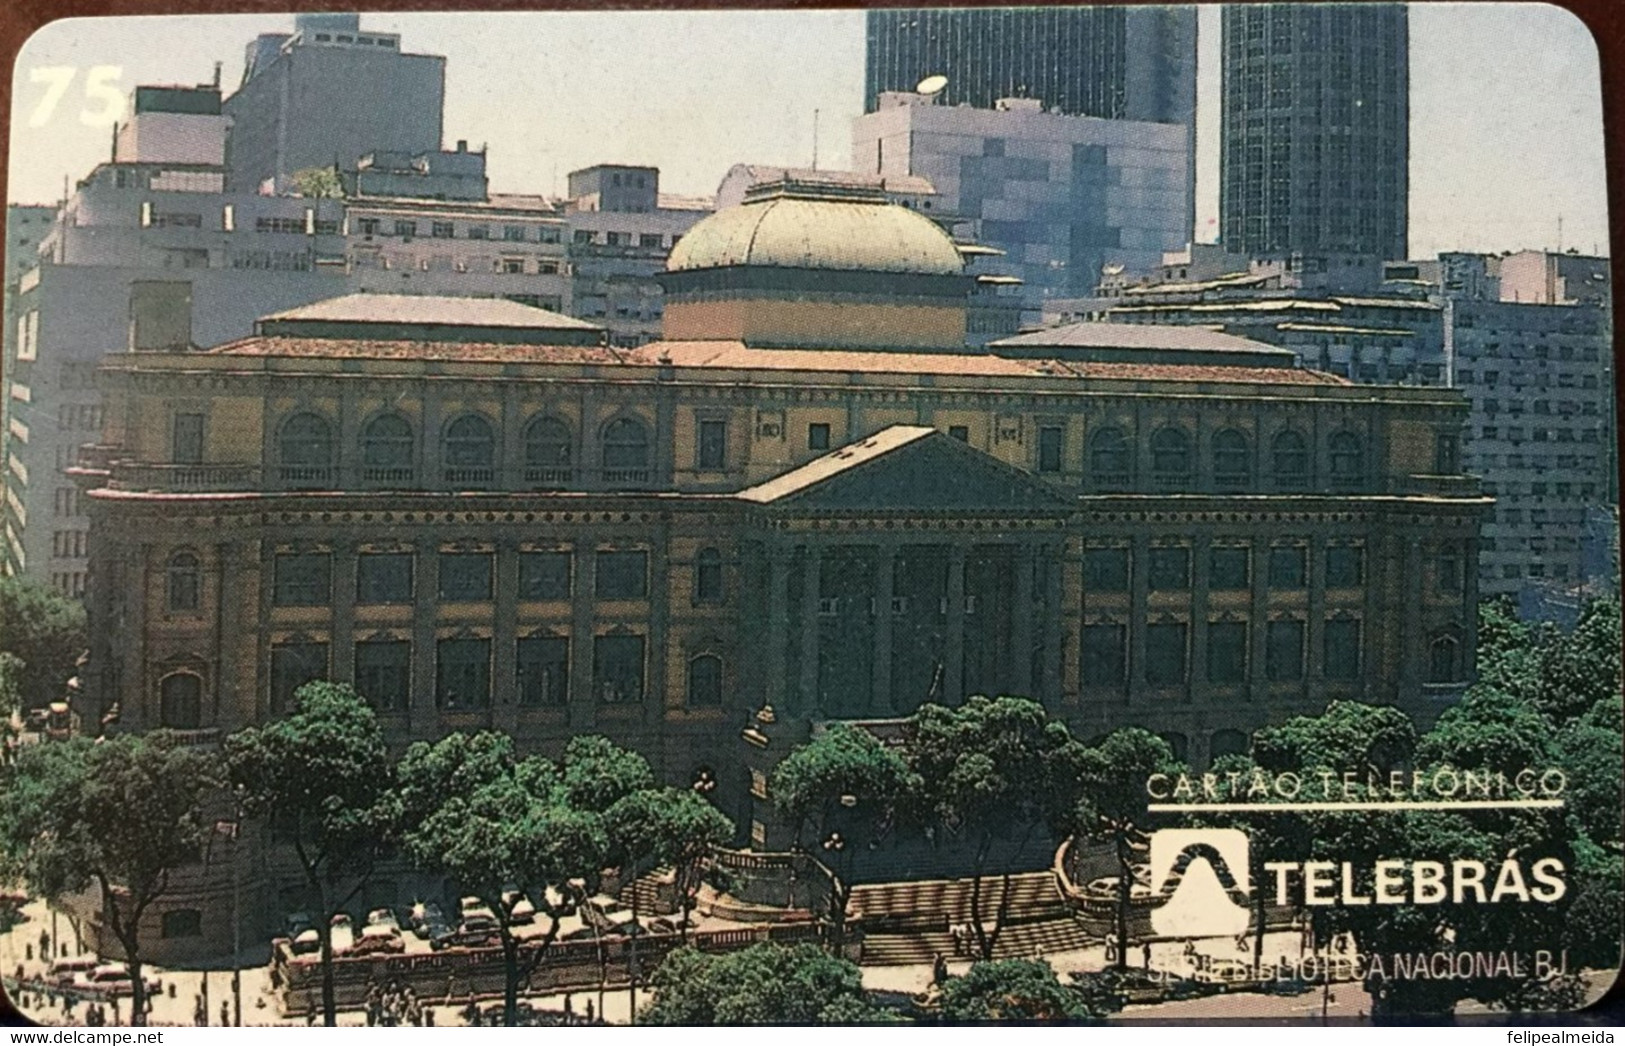 Phone Card Produced By Telebras In 1996 - Series National Library Of Rio De Janeiro - Photo Of The Building Headquarters - Cultural